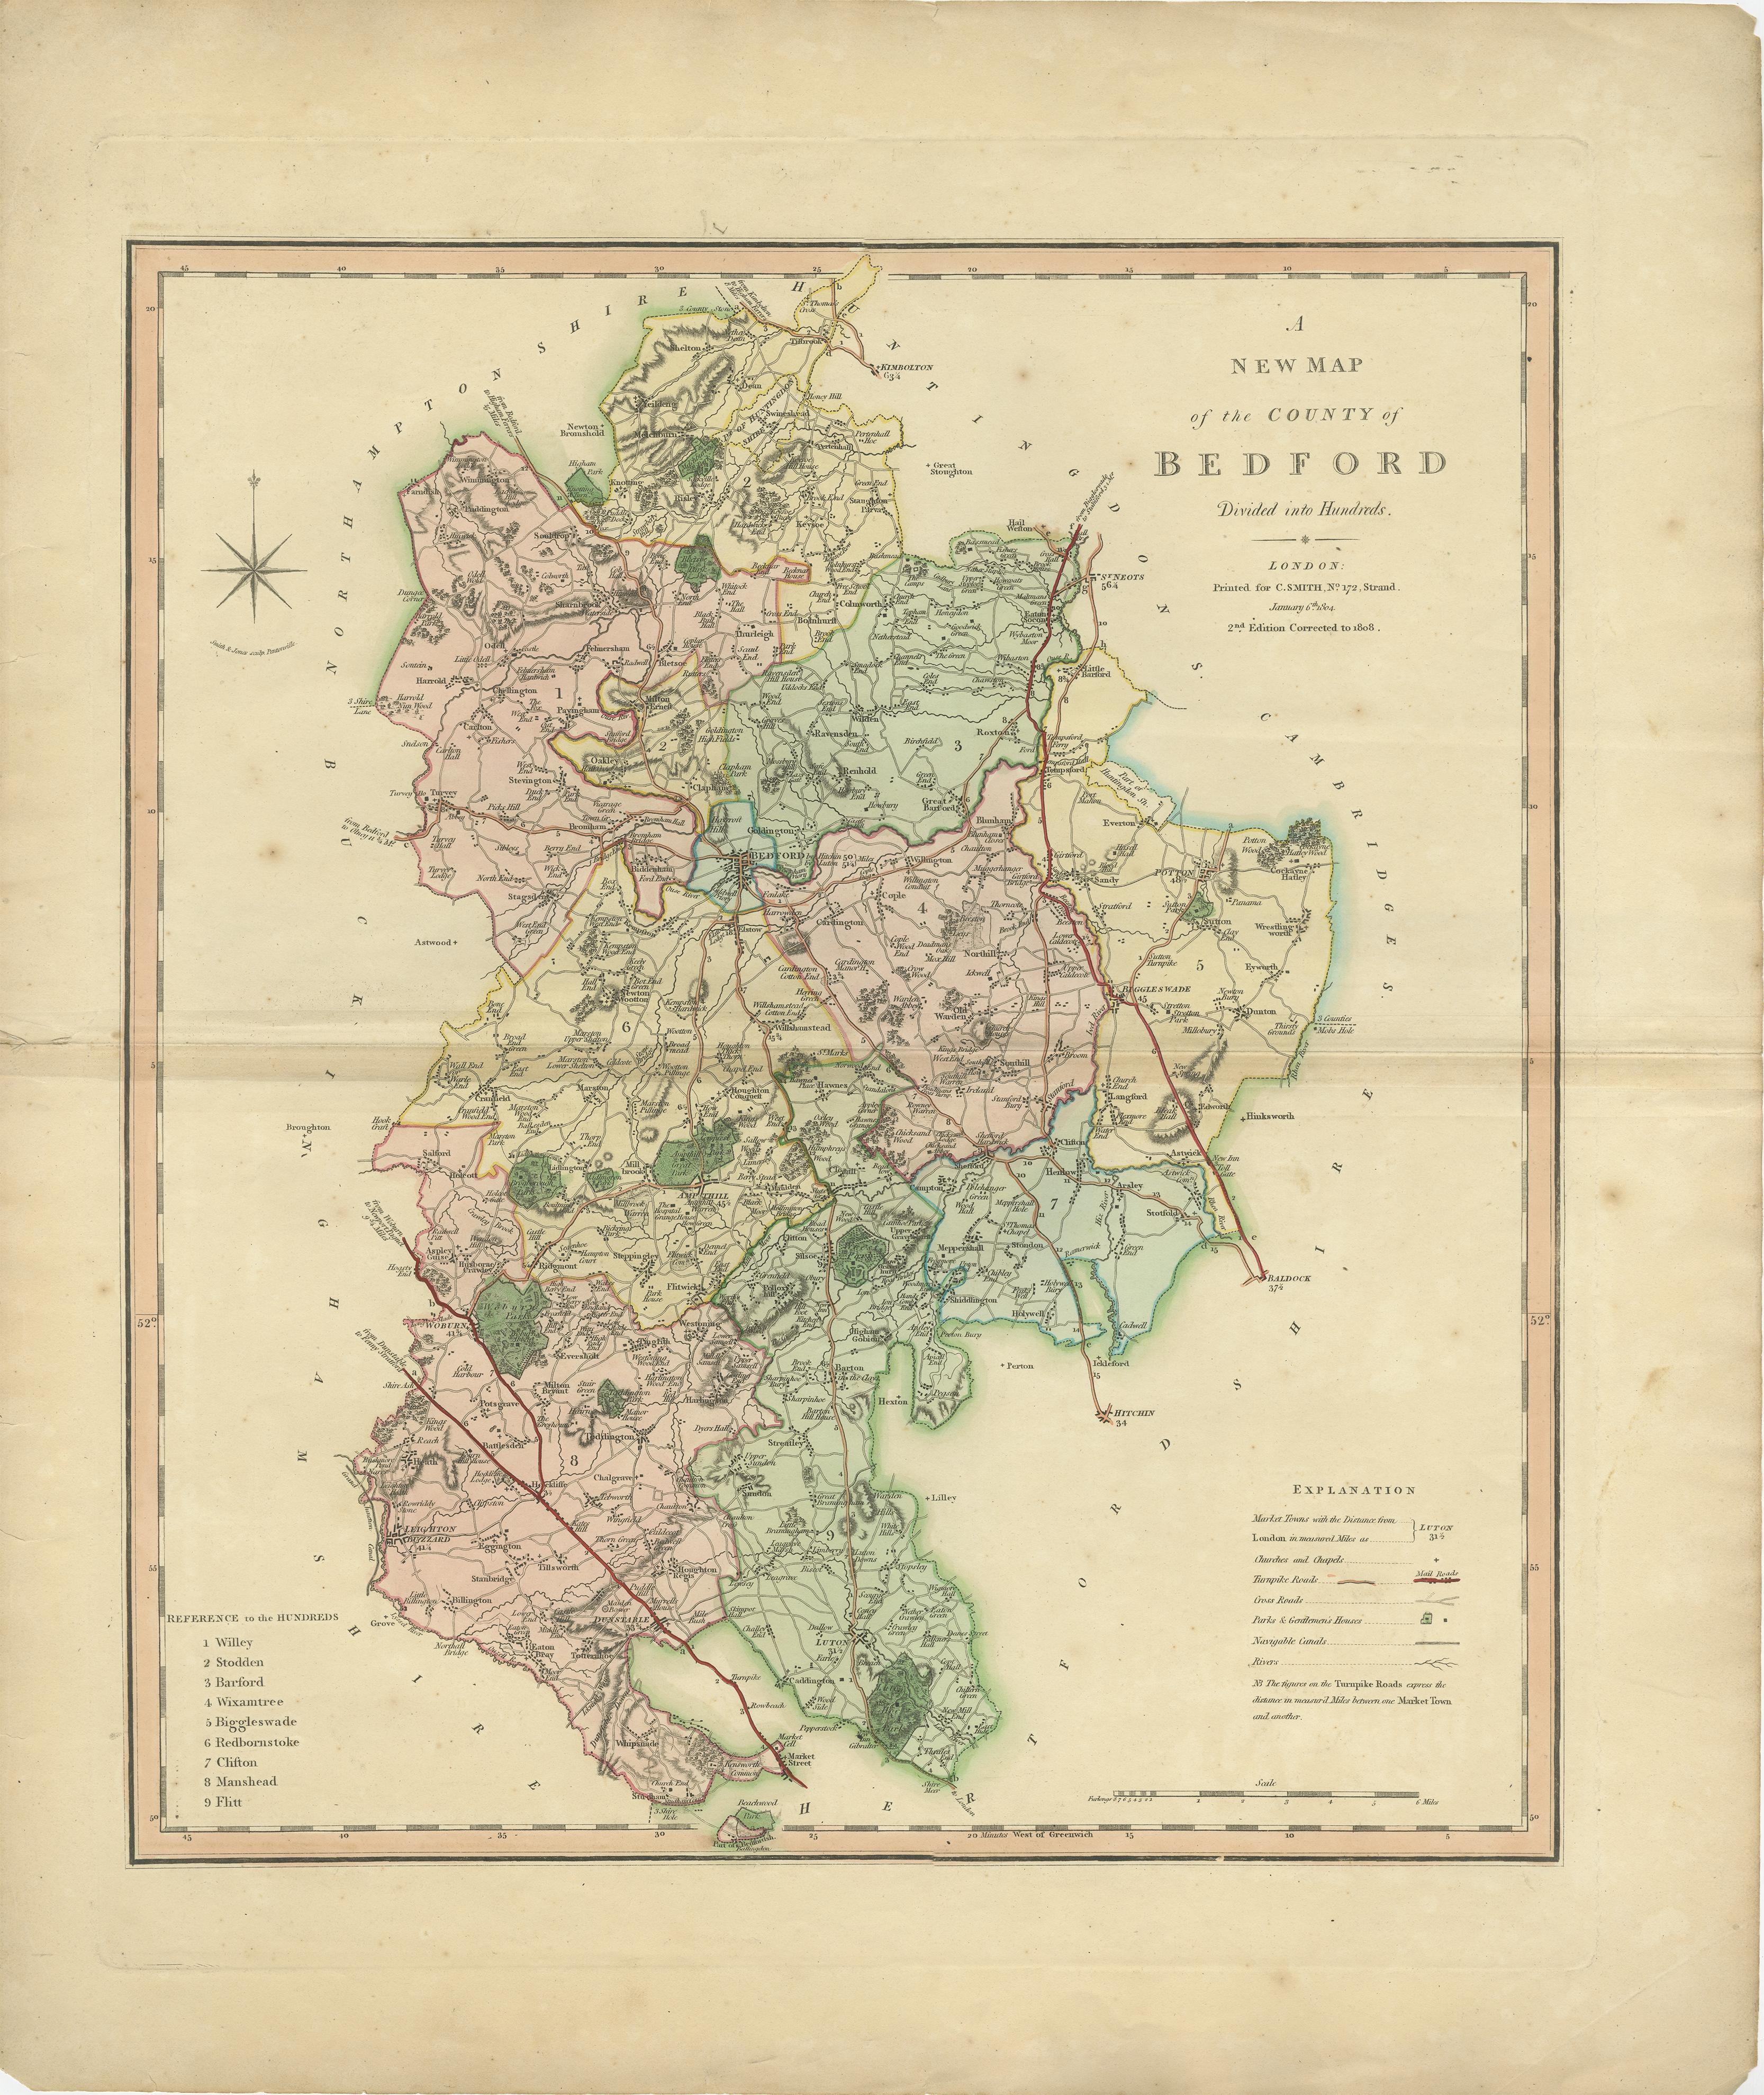 Antique county map of Bedfordshire first published c.1800. Villages, towns, and cities illustrated include Bedford, Todington, and Potton.

Charles Smith was a cartographer working in London from circa 1800. His maps were finely engraved on copper